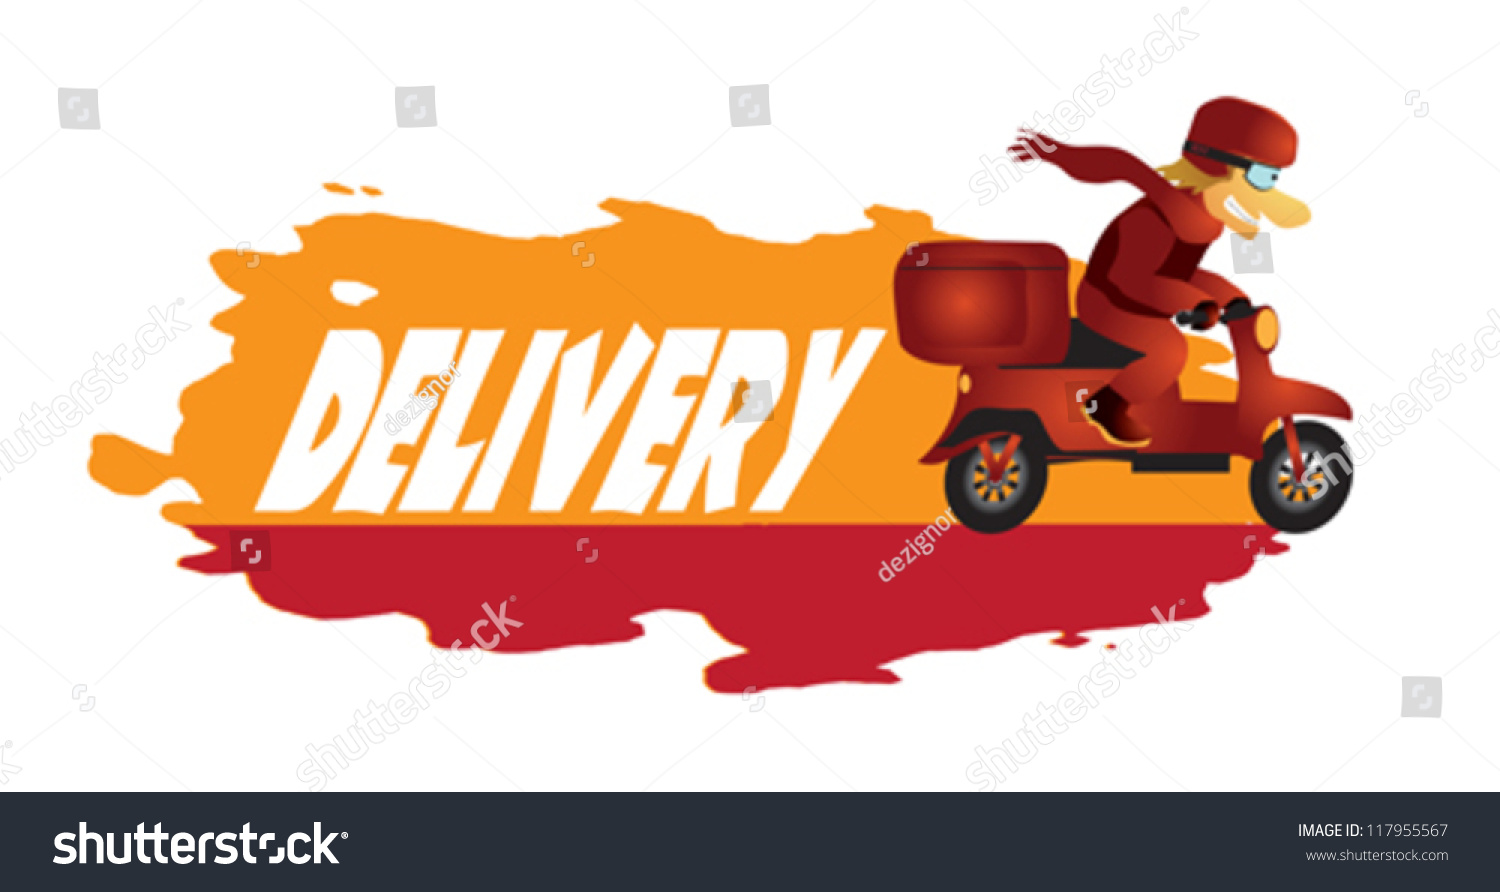 express delivery clipart - photo #17